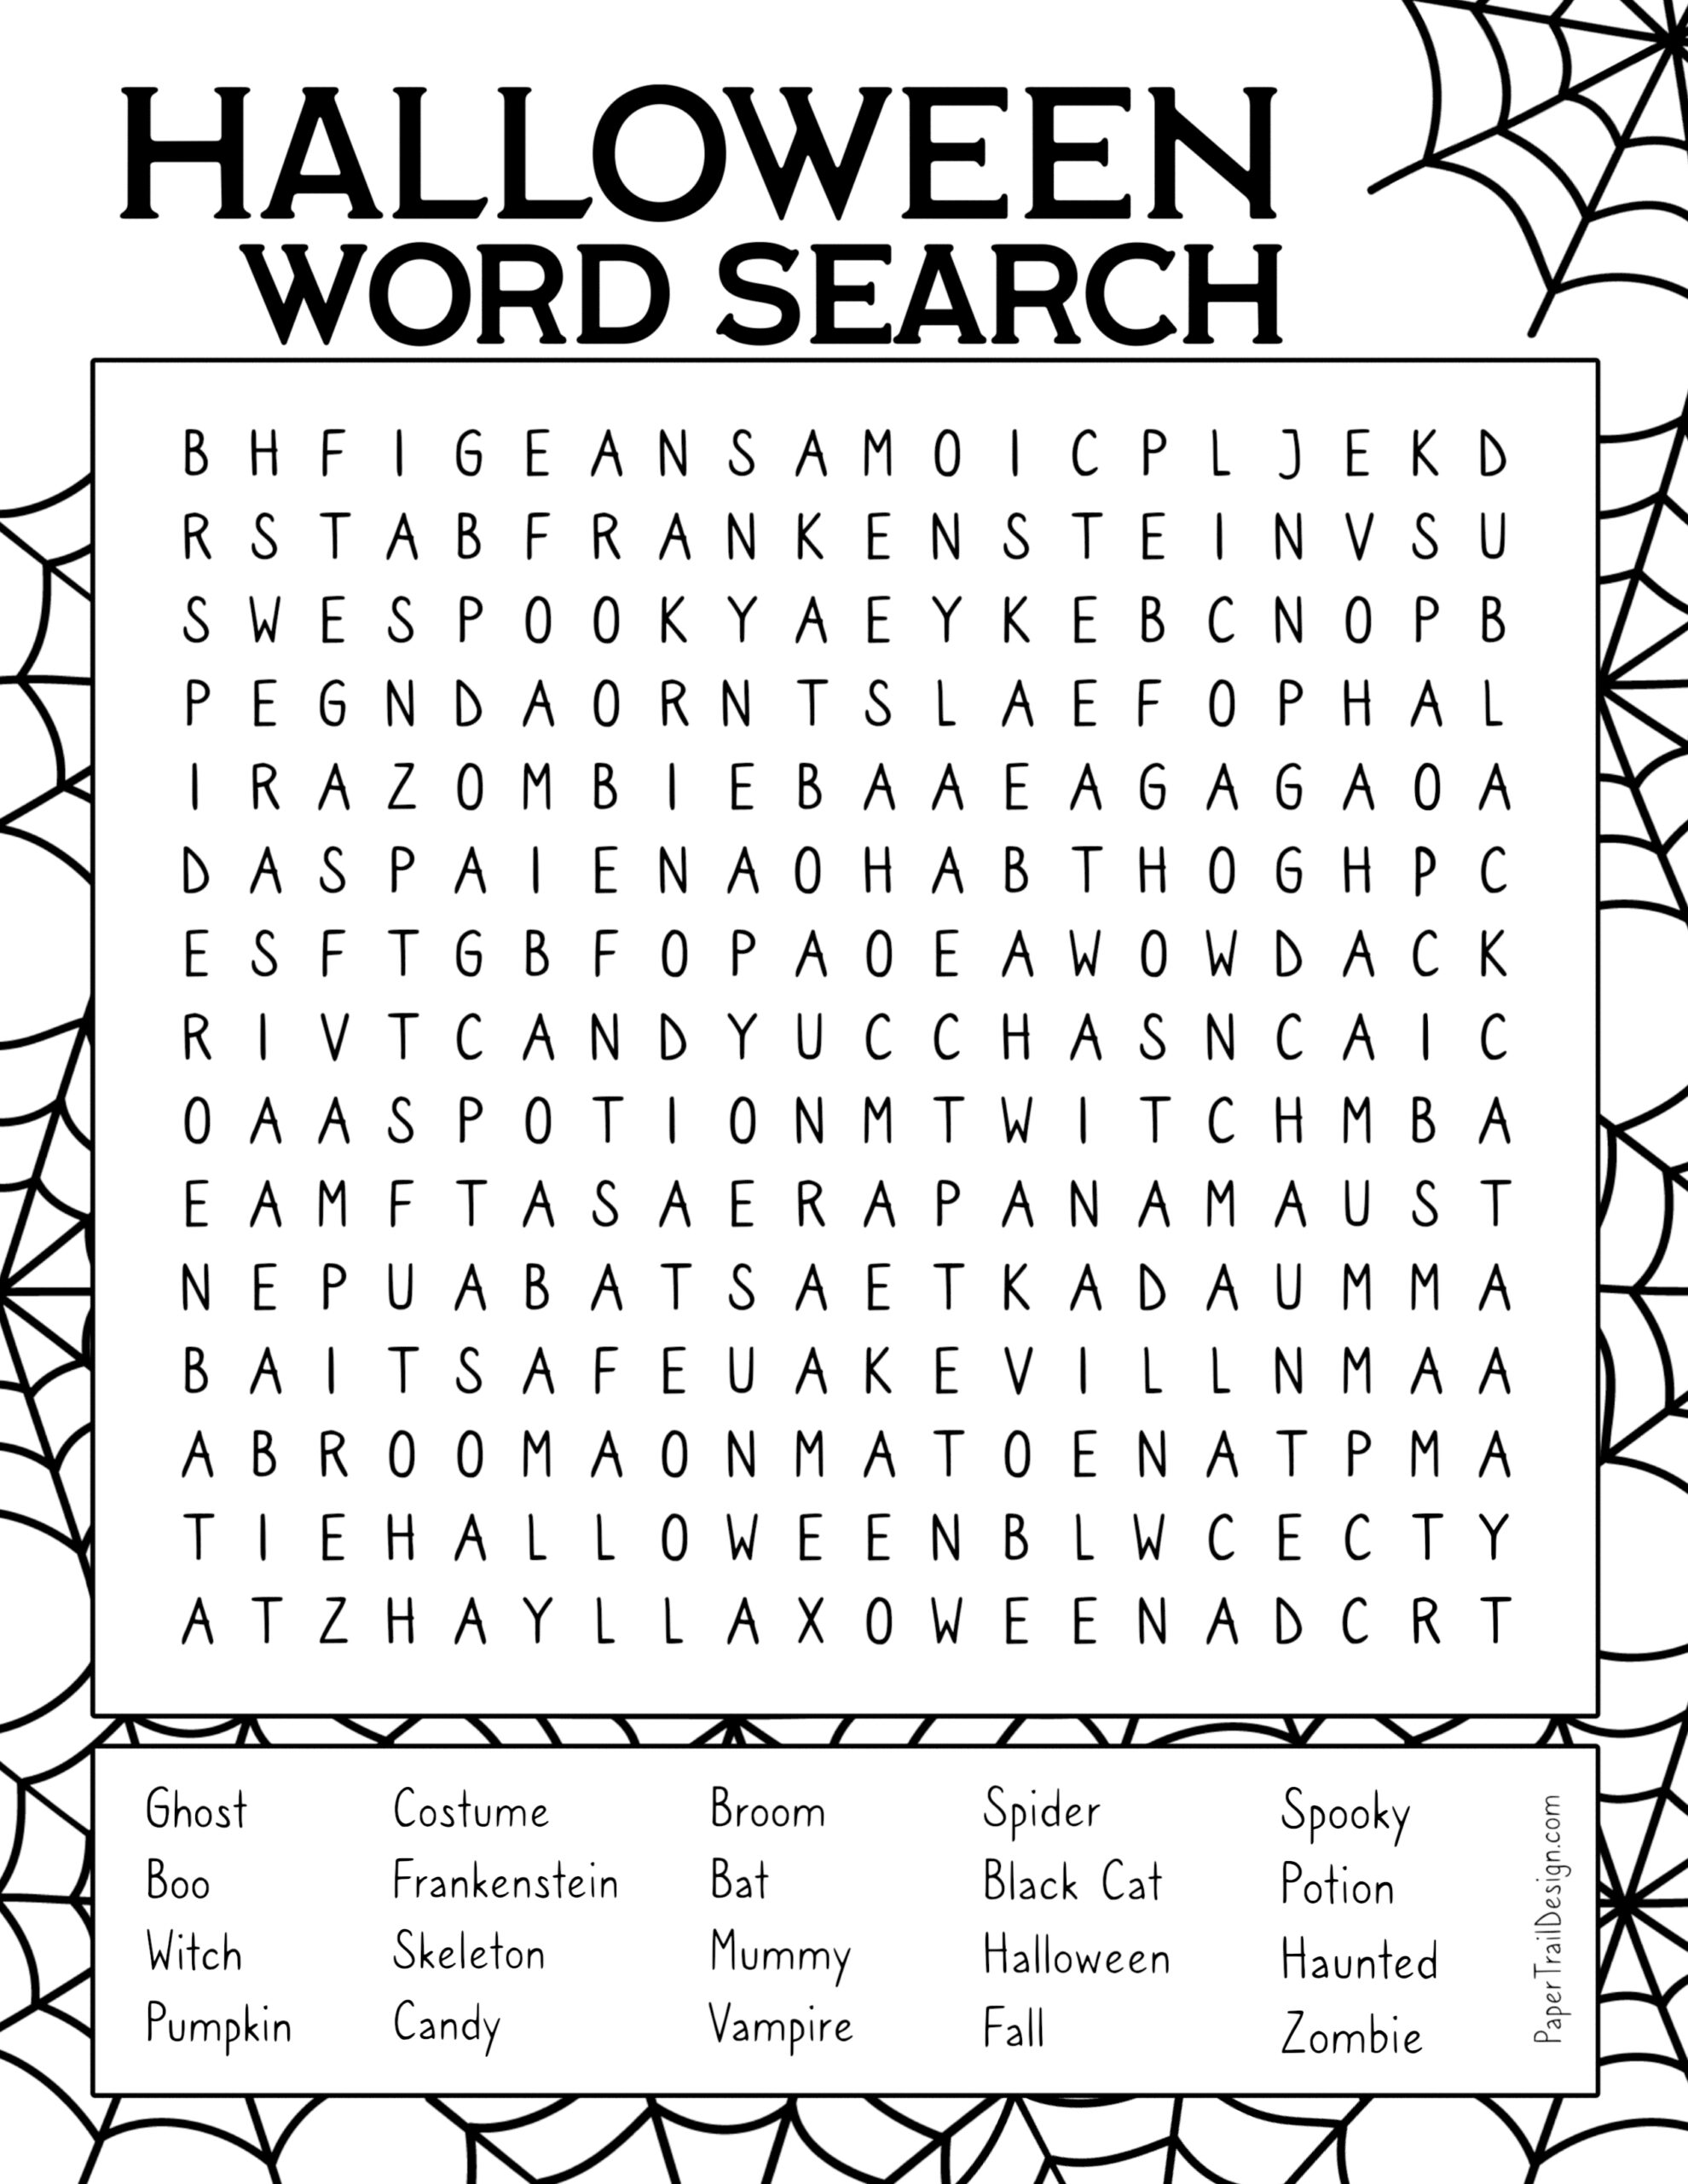 Printable Halloween Word Search 8.5 by 11 inch